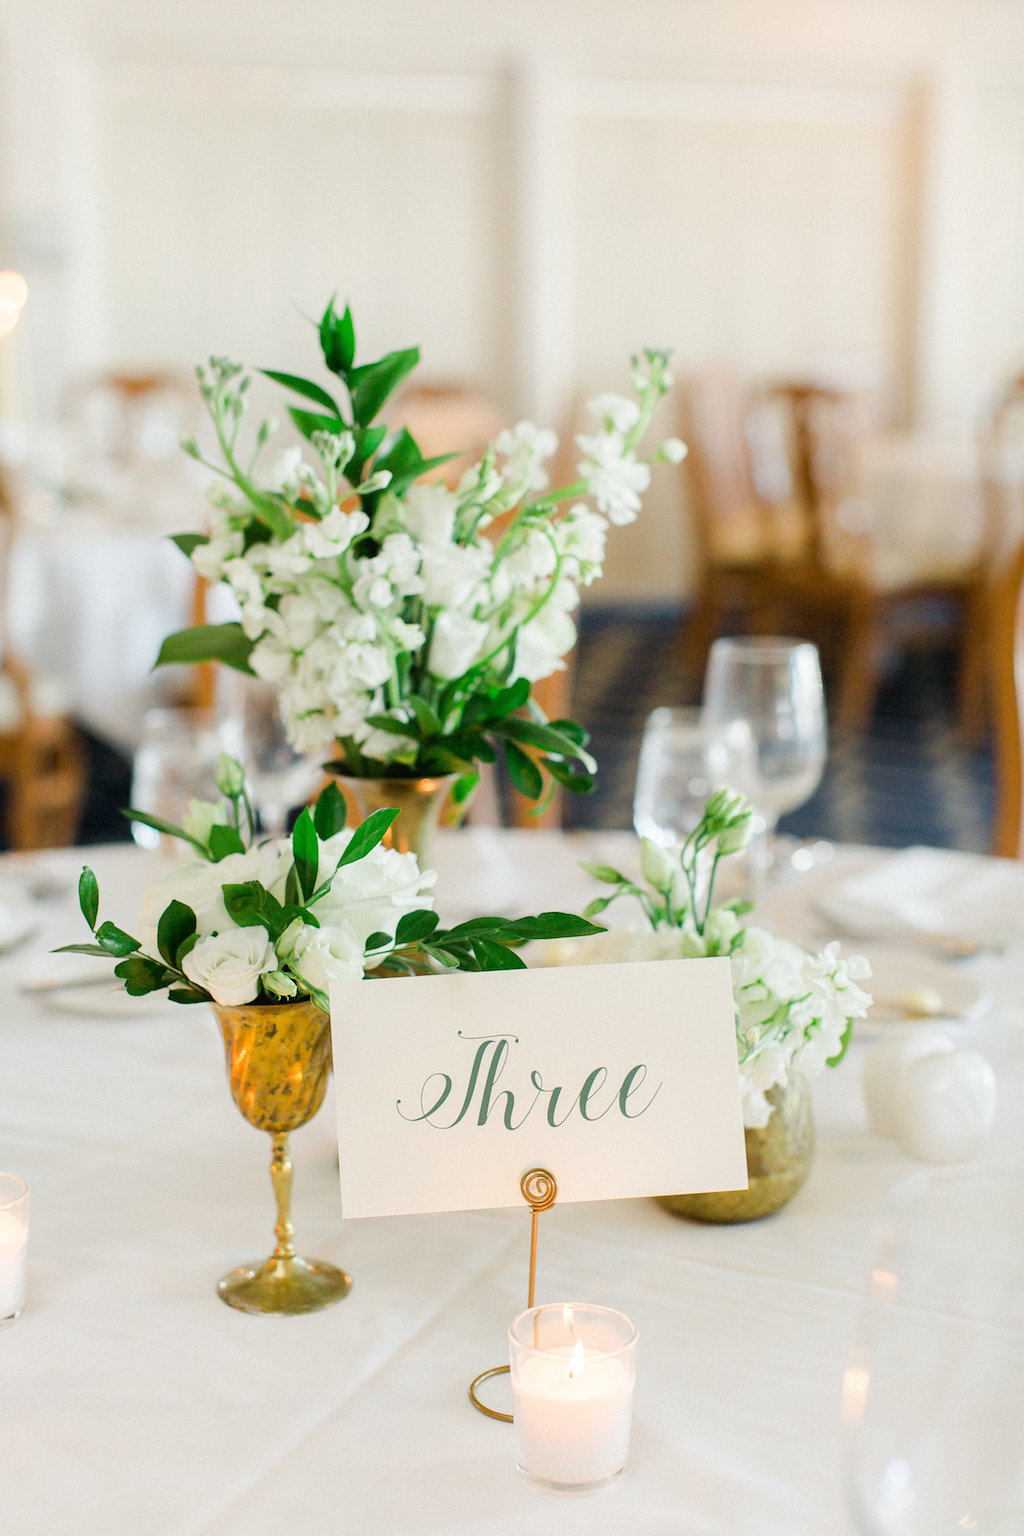 Old Florida Inspired Wedding Reception Table Decor with Small White Floral with Greenery Centerpieces in Mismatched Antique Gold Vases and Elegant Green on White Lettered Table Number Card | Tampa Bay Wedding Planner Glitz Events